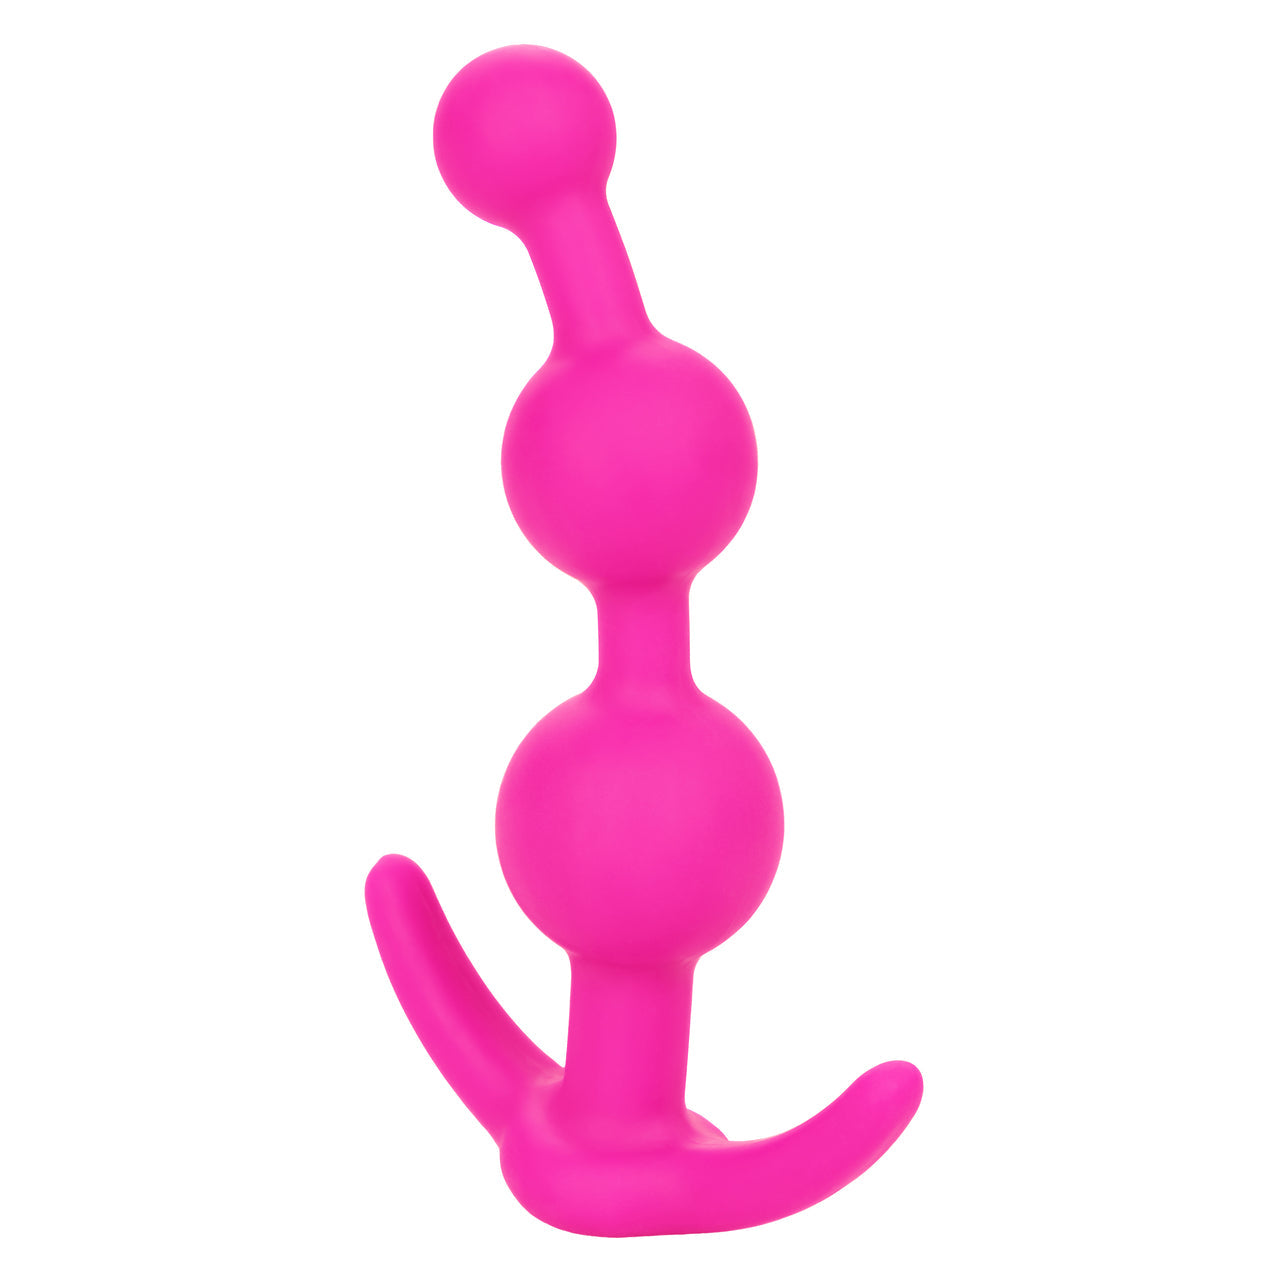 Booty Call Booty Beads - Pink - Thorn & Feather Sex Toy Canada